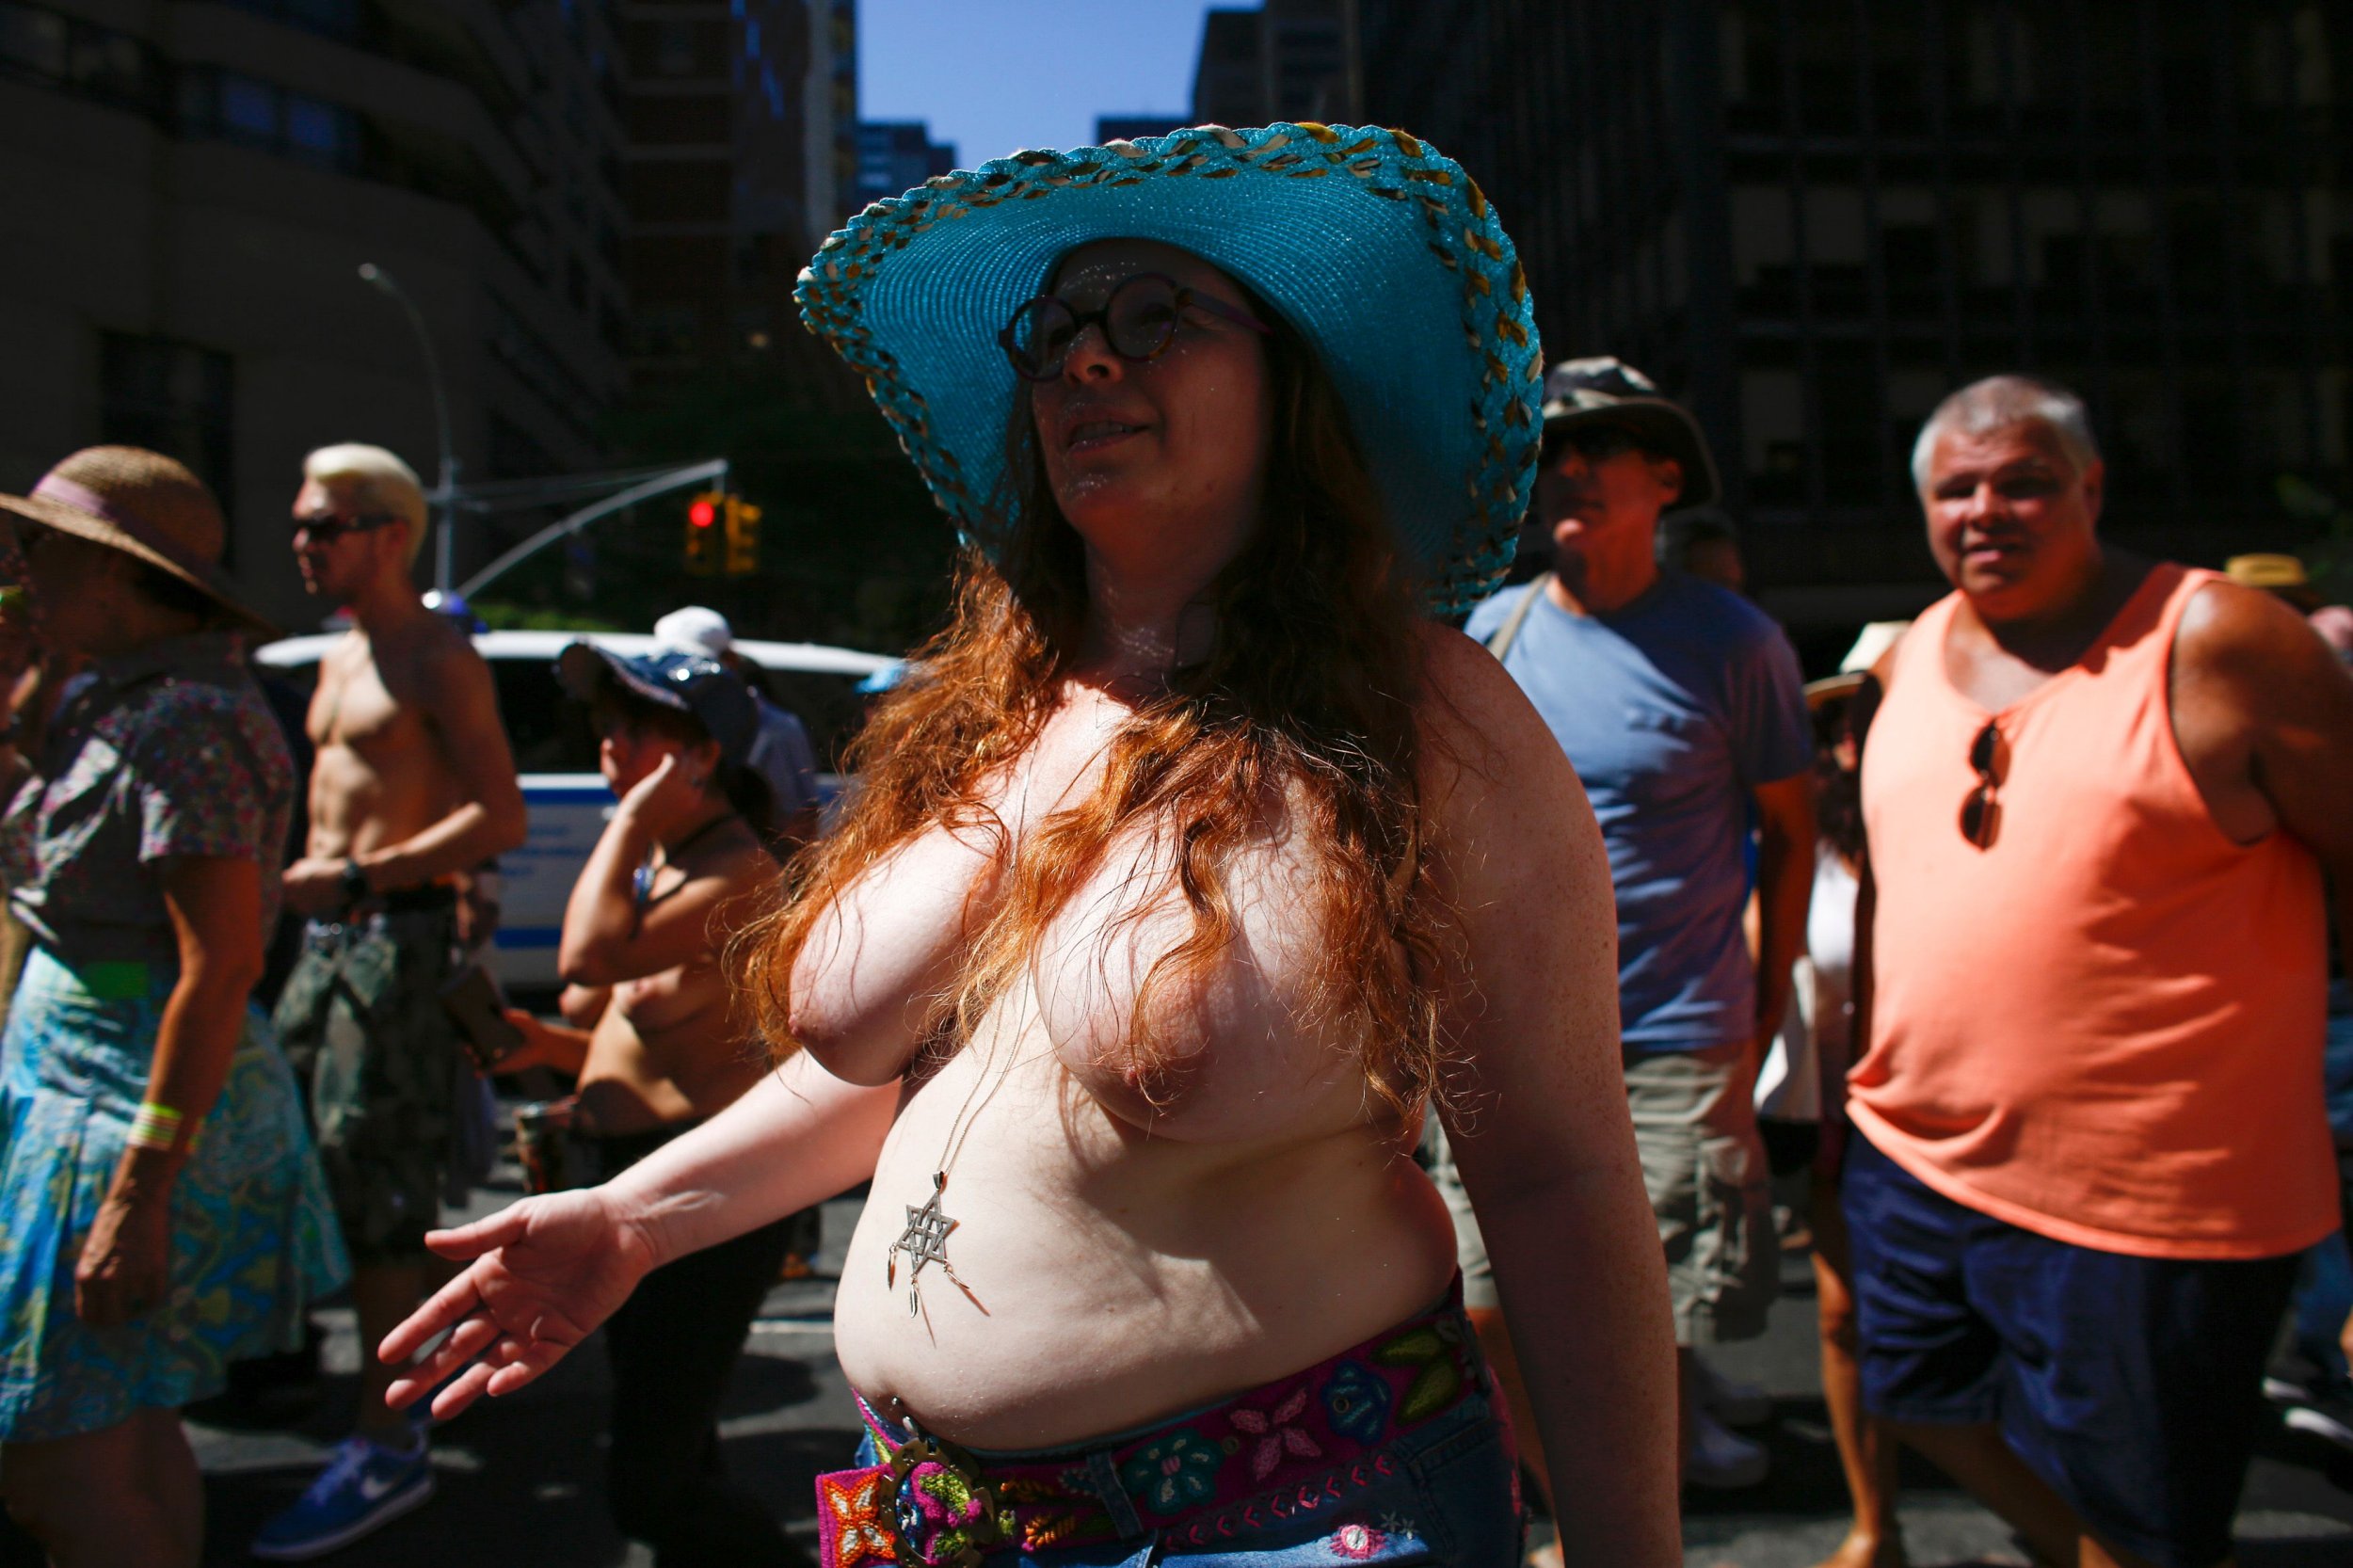 bruce weatherford recommends big boobs on parade pic